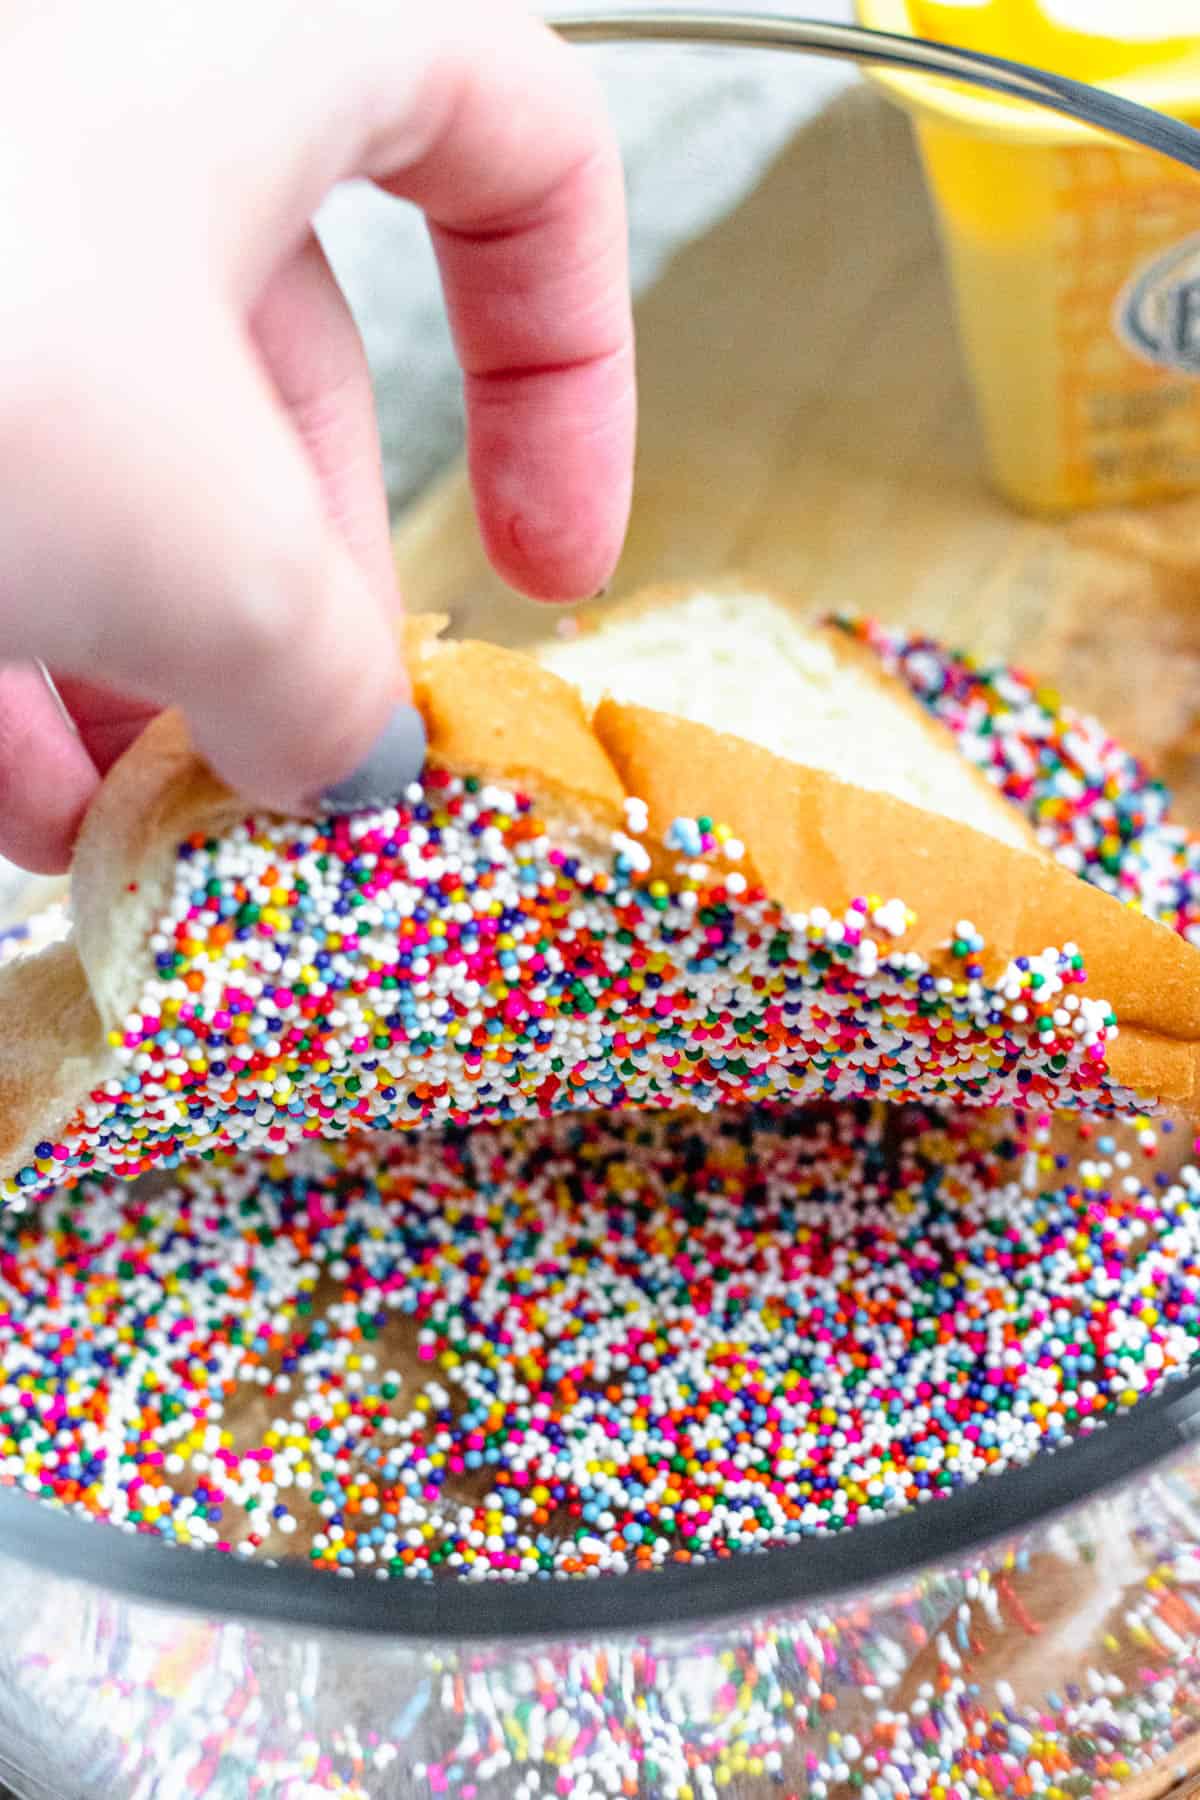 Hand lifting a slice of bread out of a bowl of sprinkles